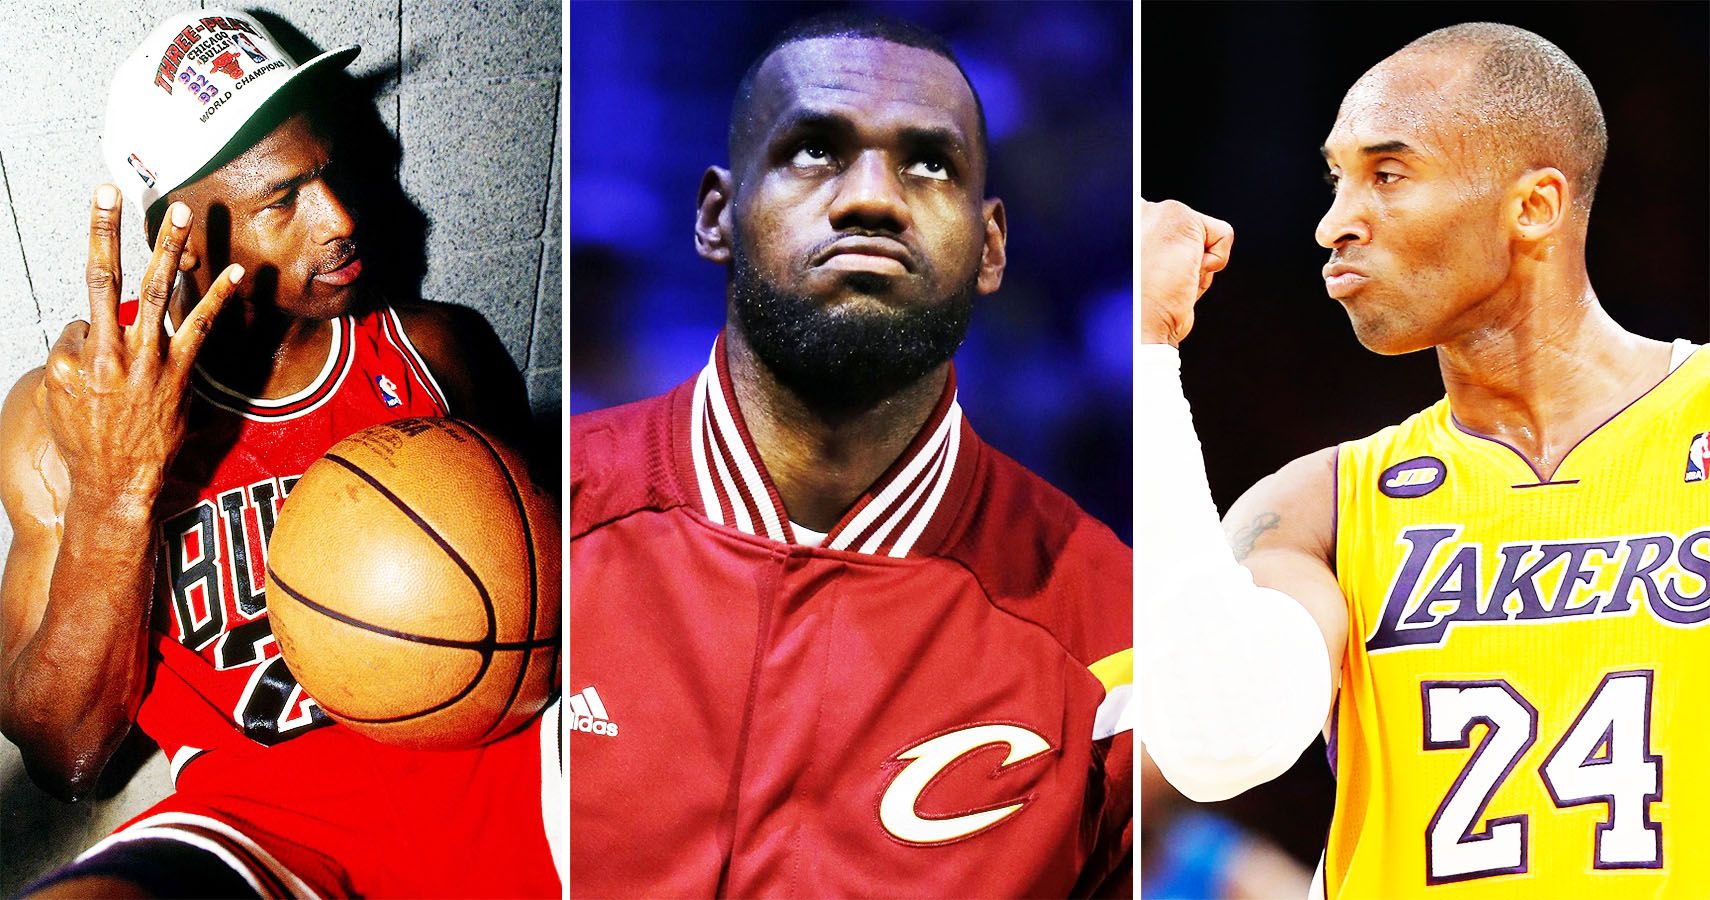 Top 15 All-Time NBA Players That Are Better Than LeBron James1710 x 900